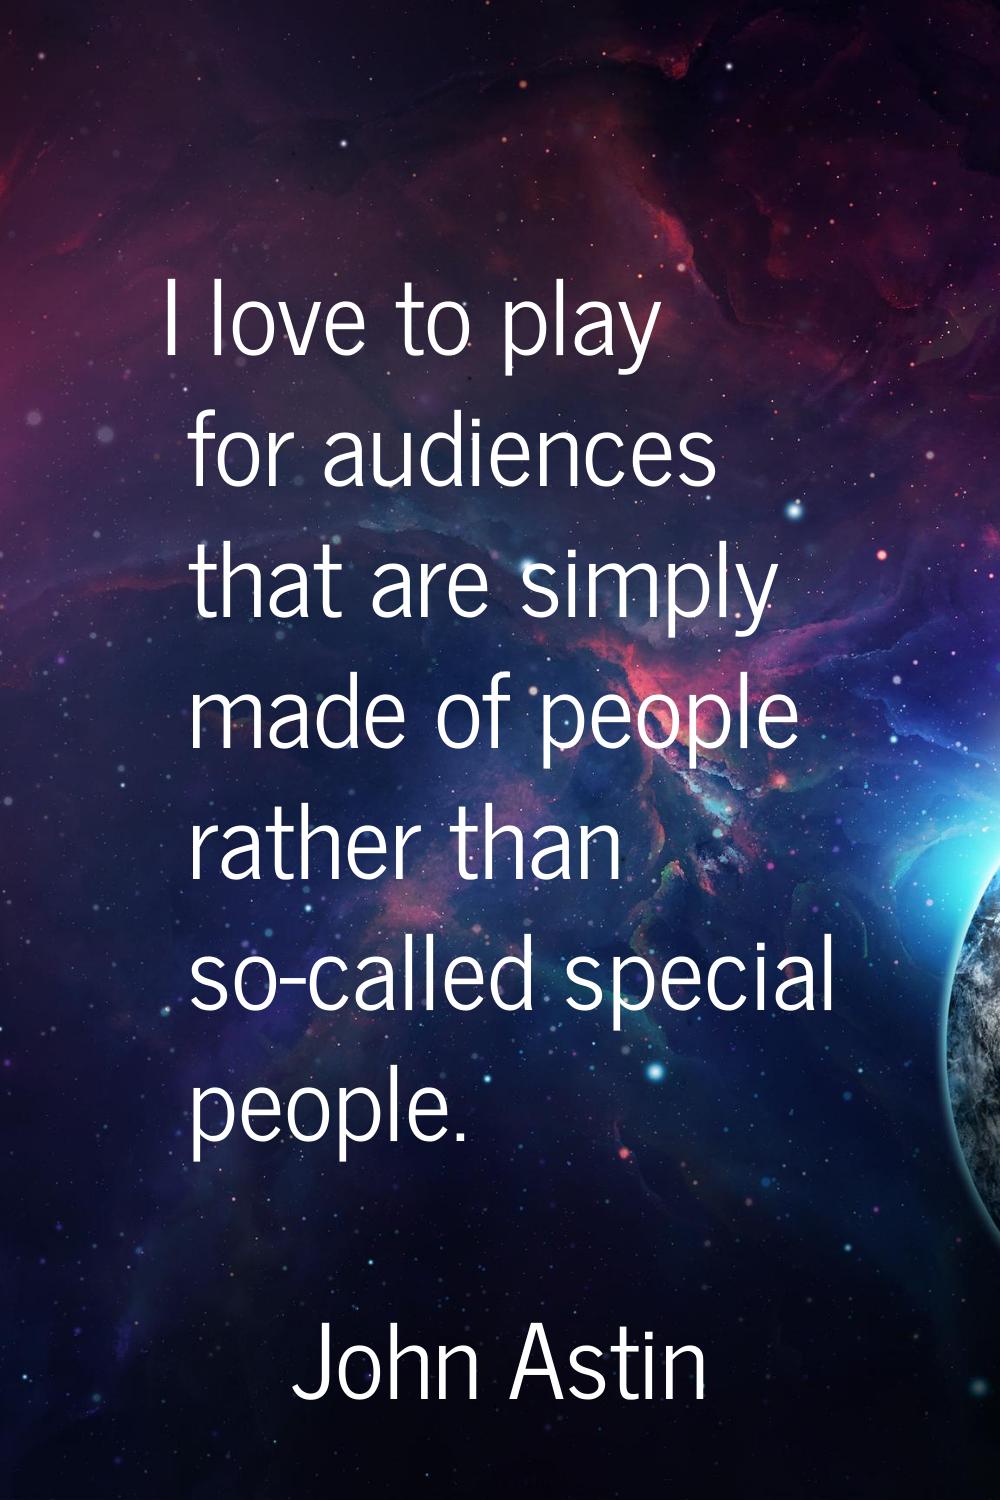 I love to play for audiences that are simply made of people rather than so-called special people.